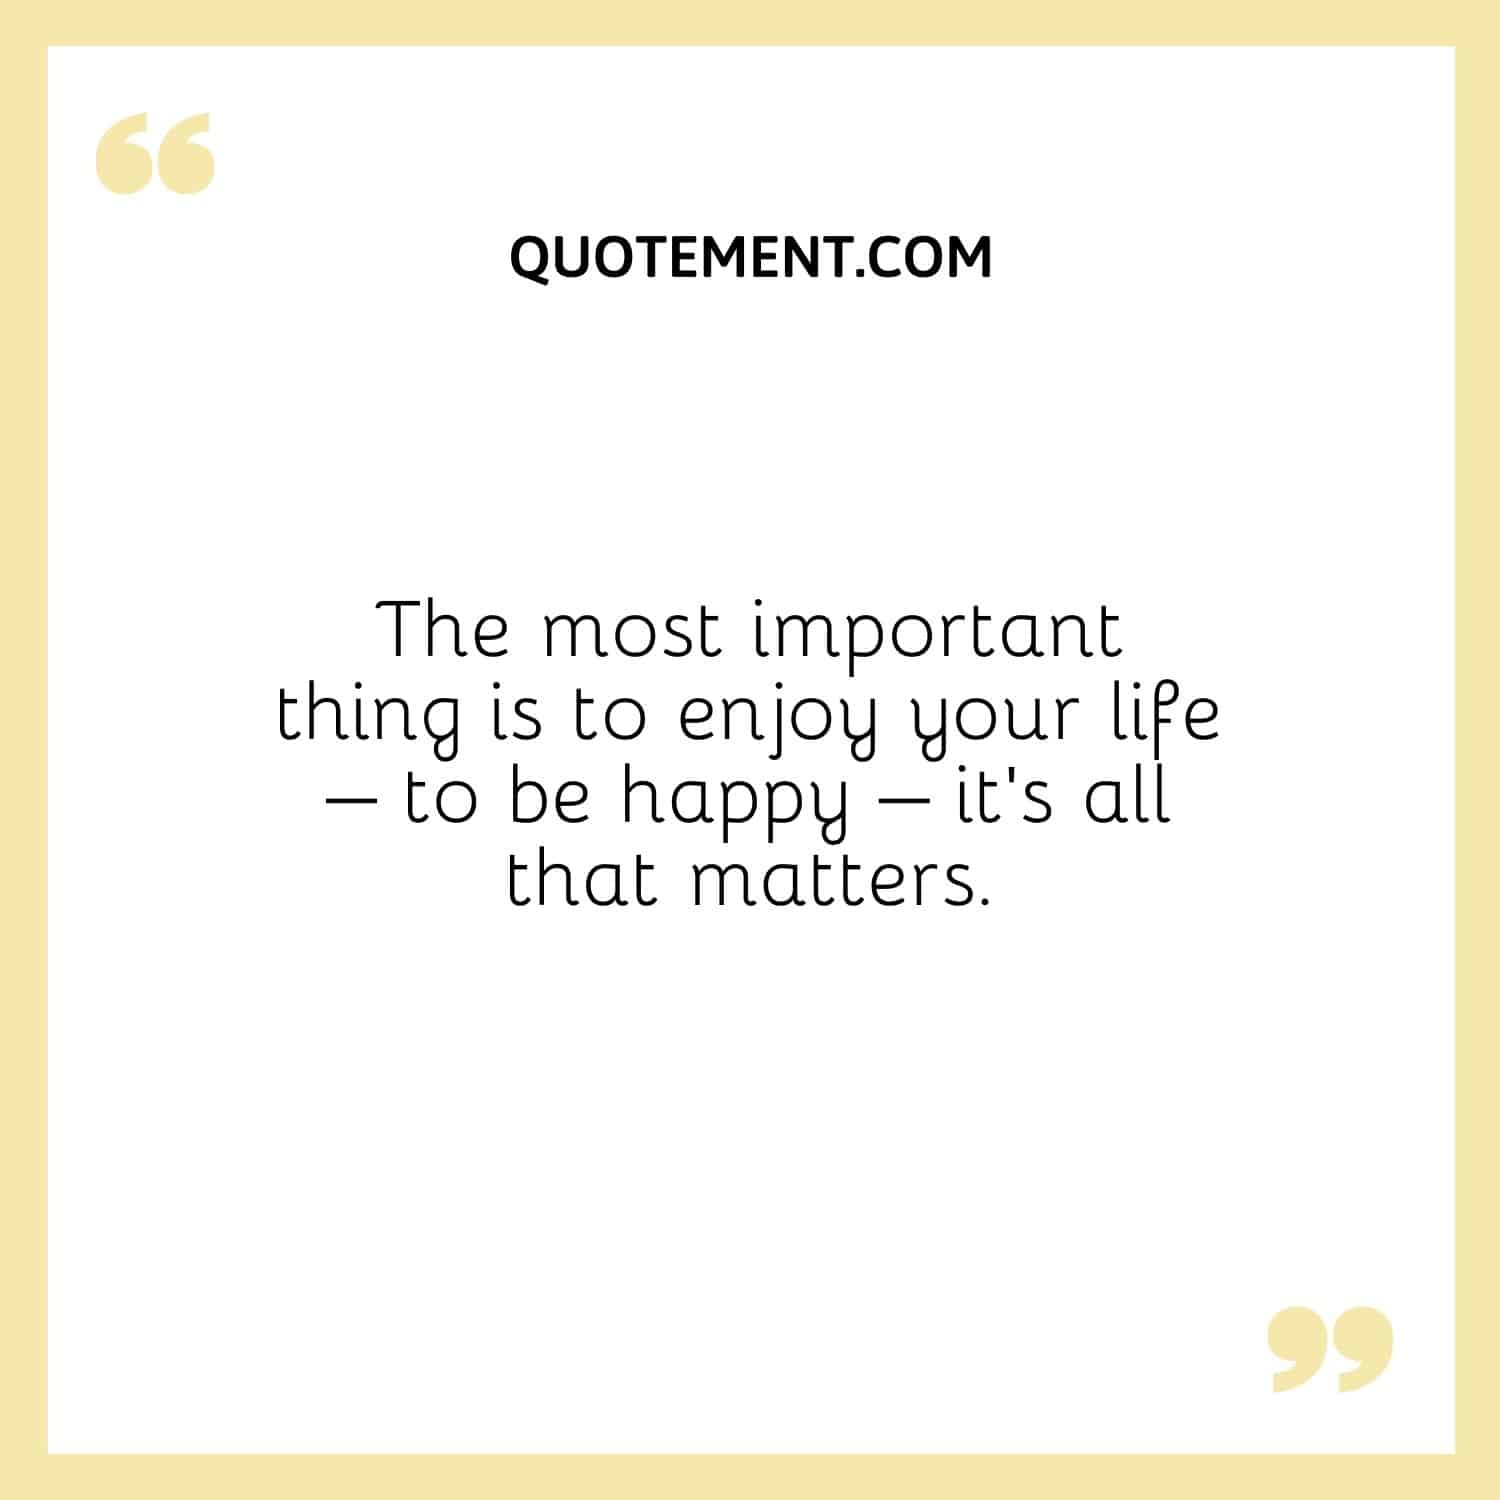 The most important thing is to enjoy your life – to be happy – it’s all that matters.